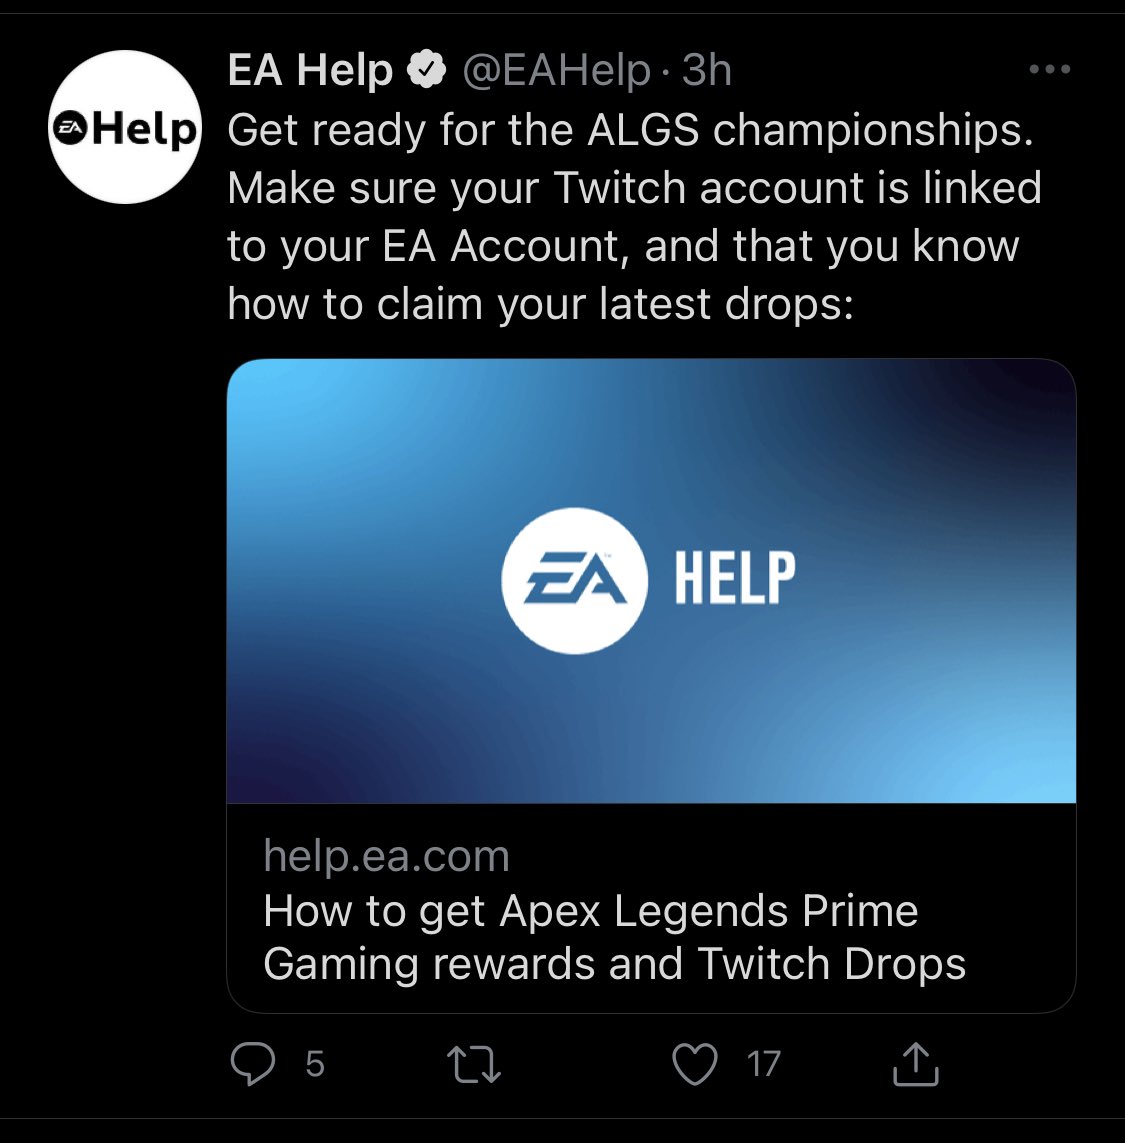 Apex Legends News Judging By This Tweet From Ea There Will Be More Twitch Drops As Rewards For Watching The Algs Championship Respawn Has Not Announced More Rewards Yet Though